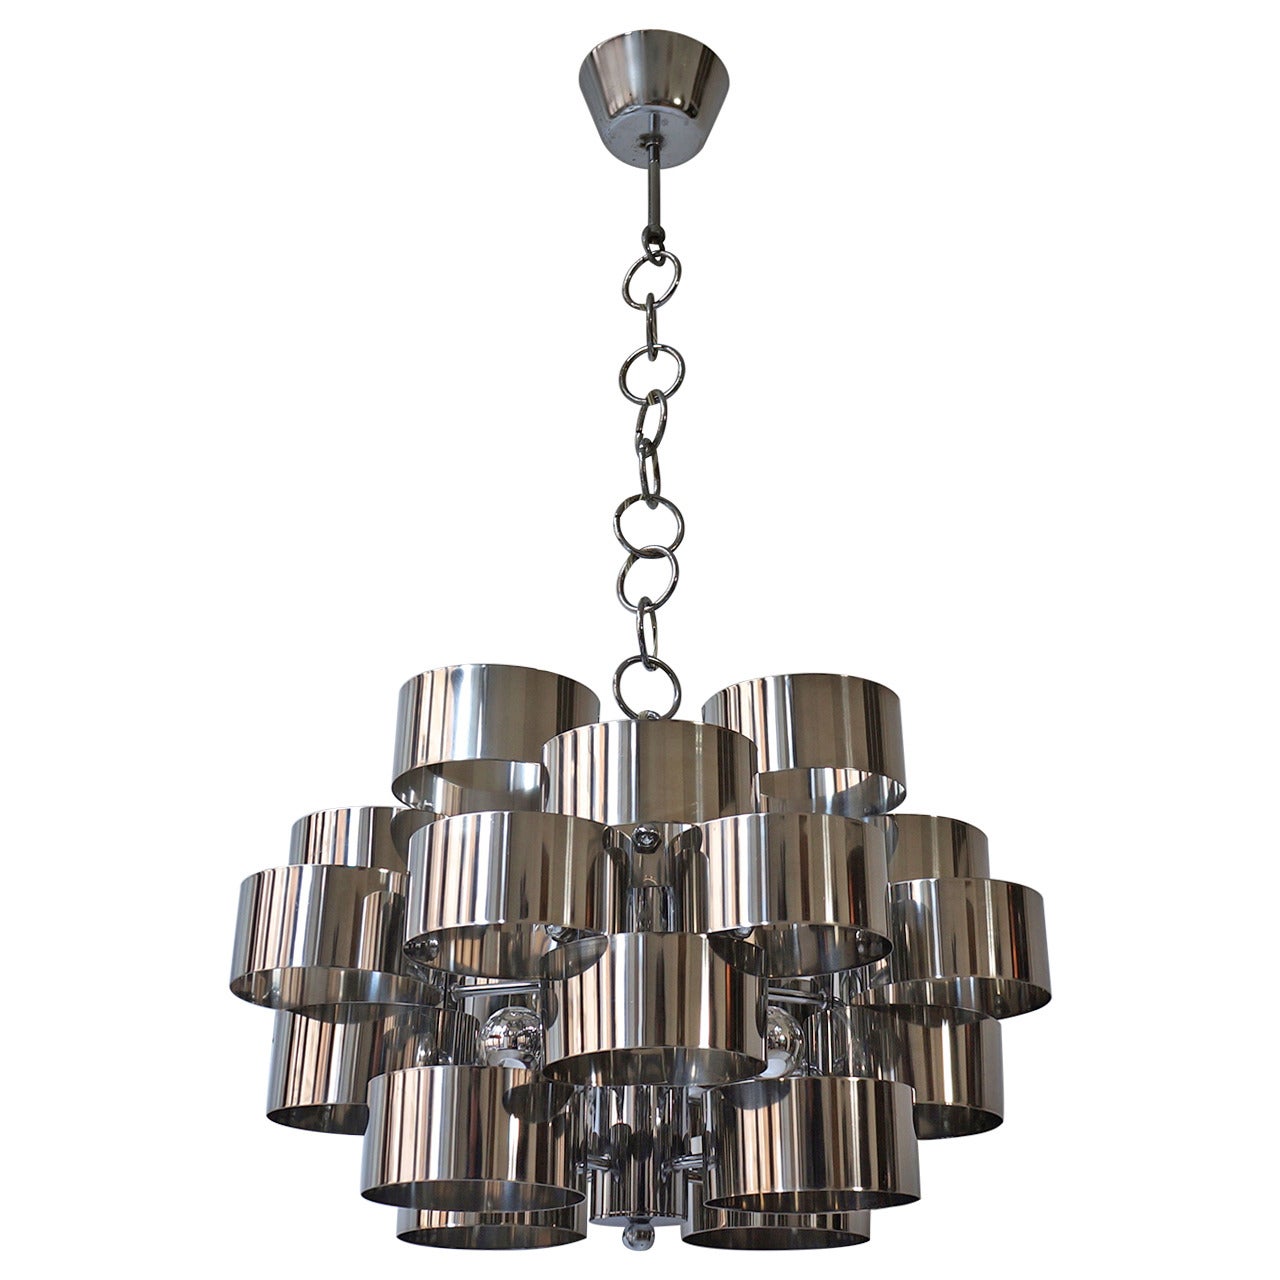 One of Two Italian Chrome Loop Chandeliers by Sciolari For Sale